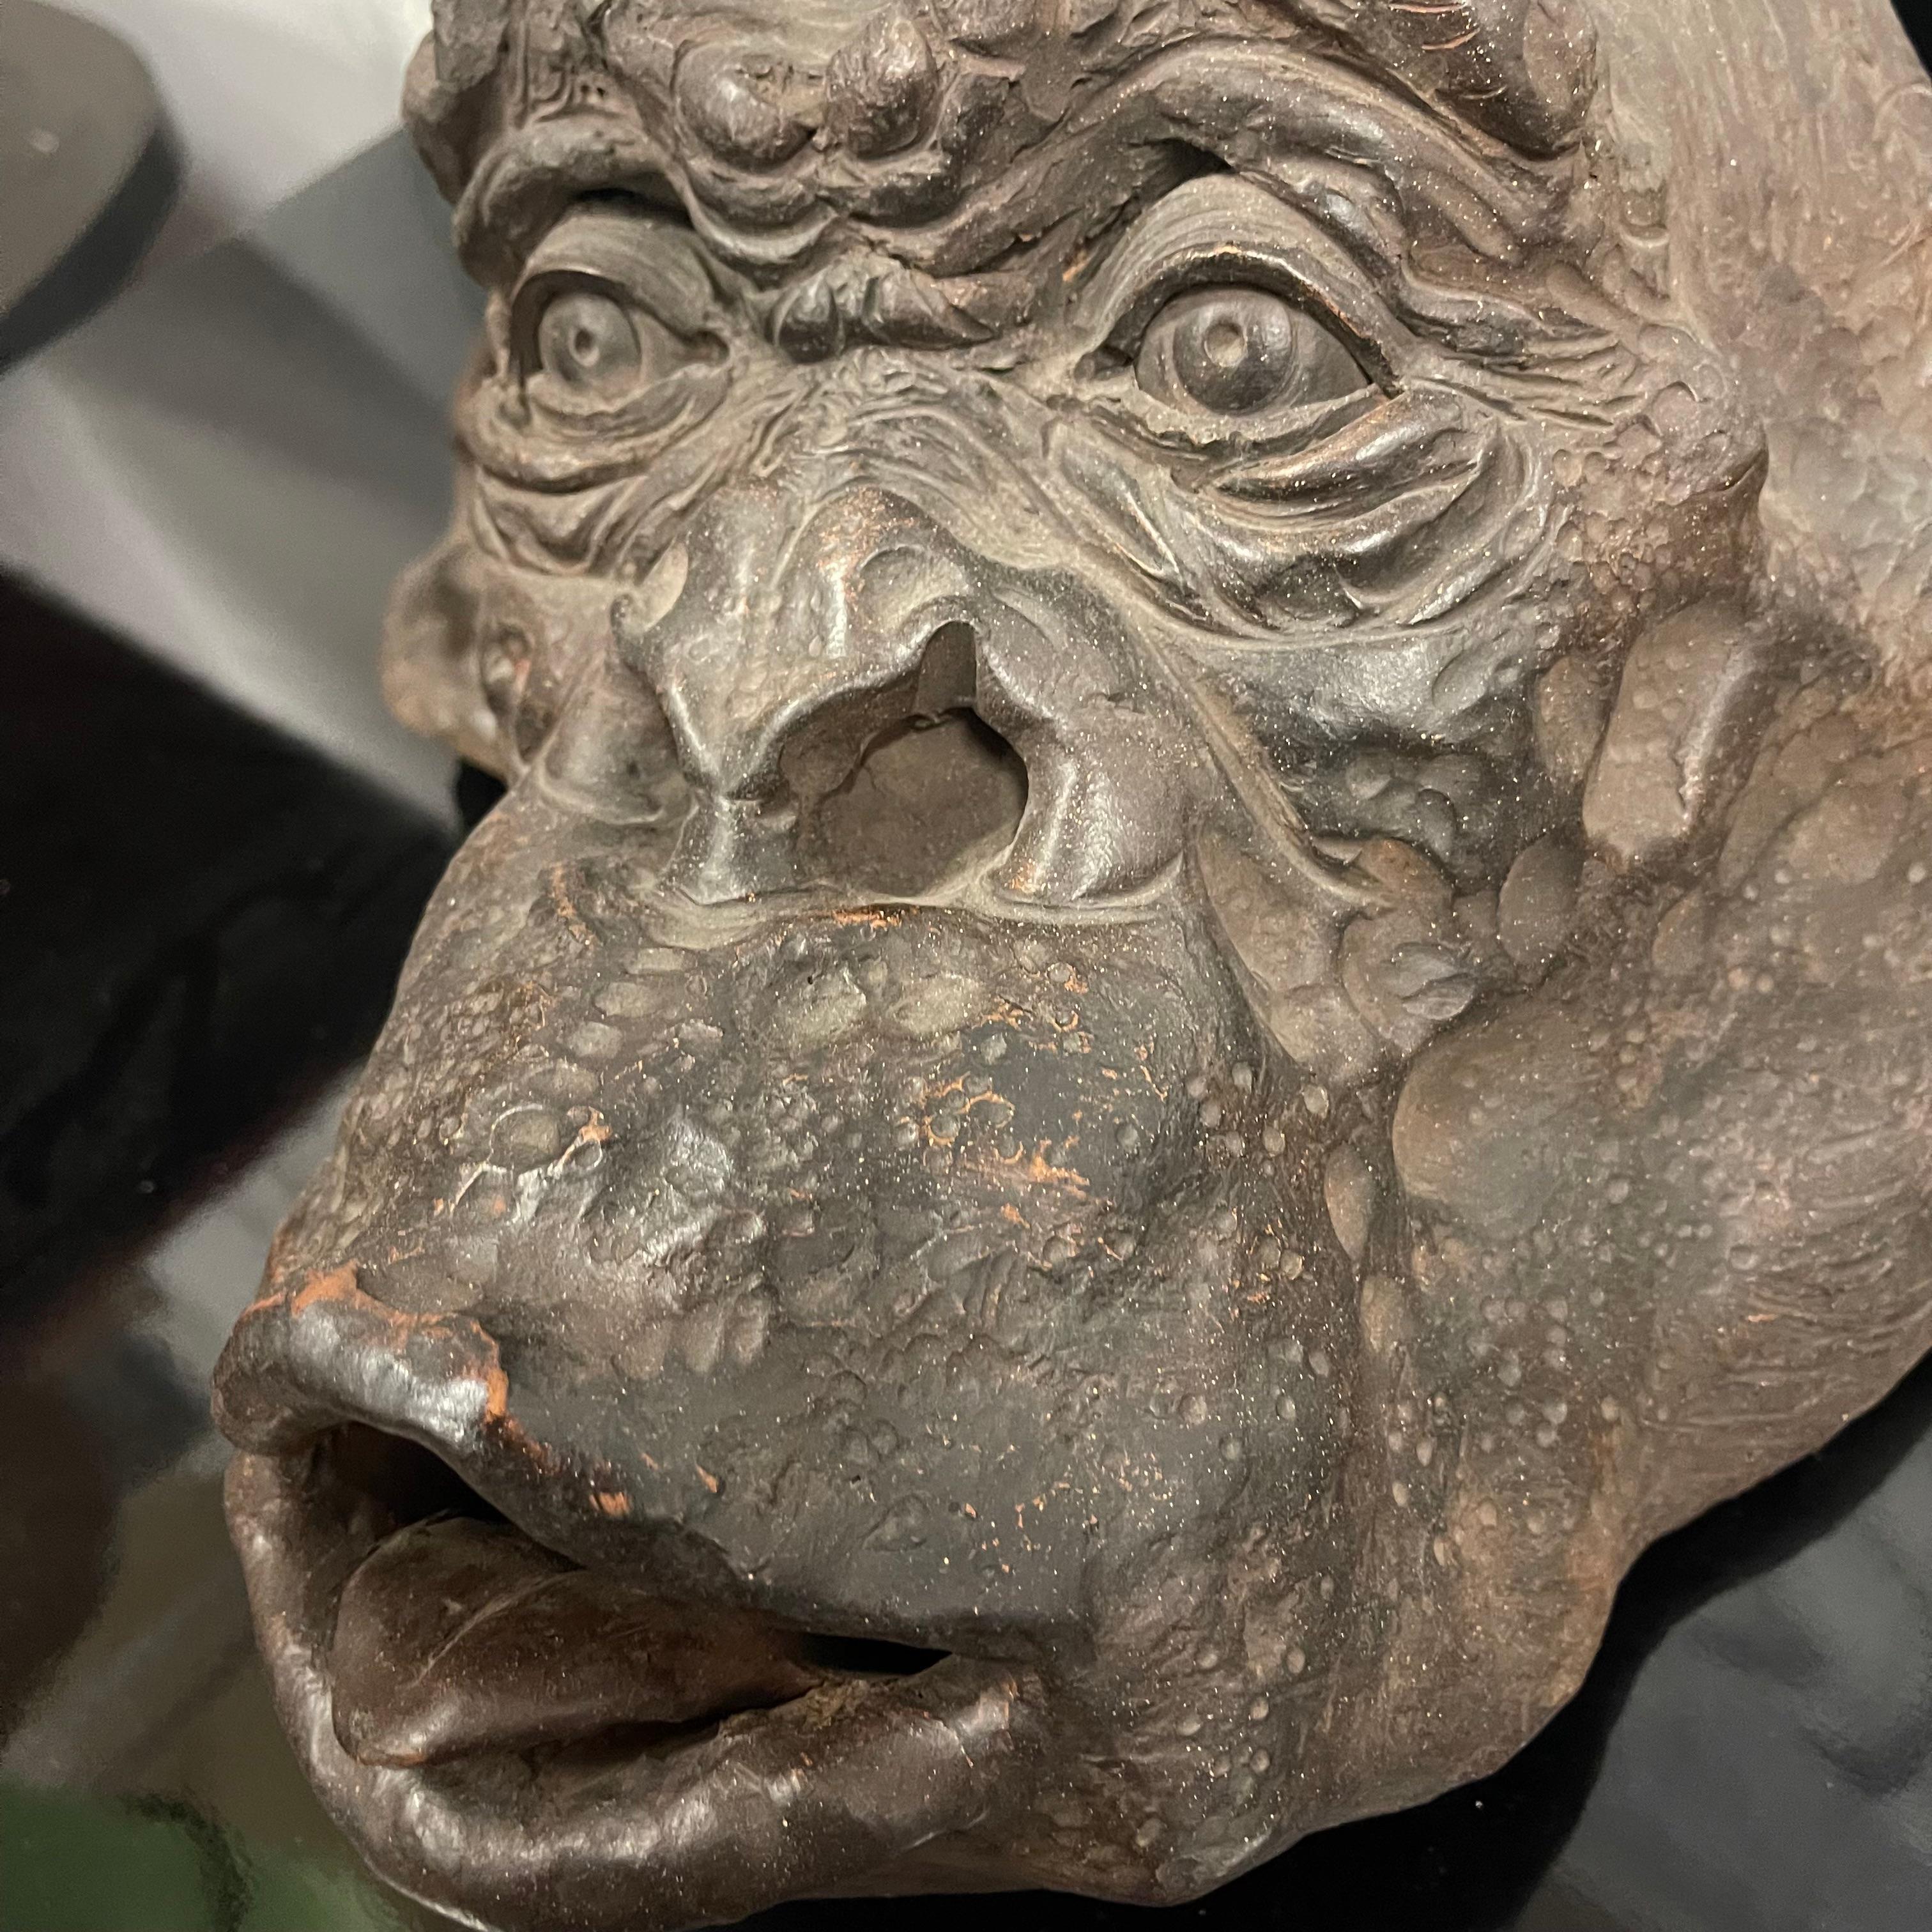 Bonobo Monkey Head Sculpture in Terracotta Signed and Dated - Italy 2019 For Sale 7